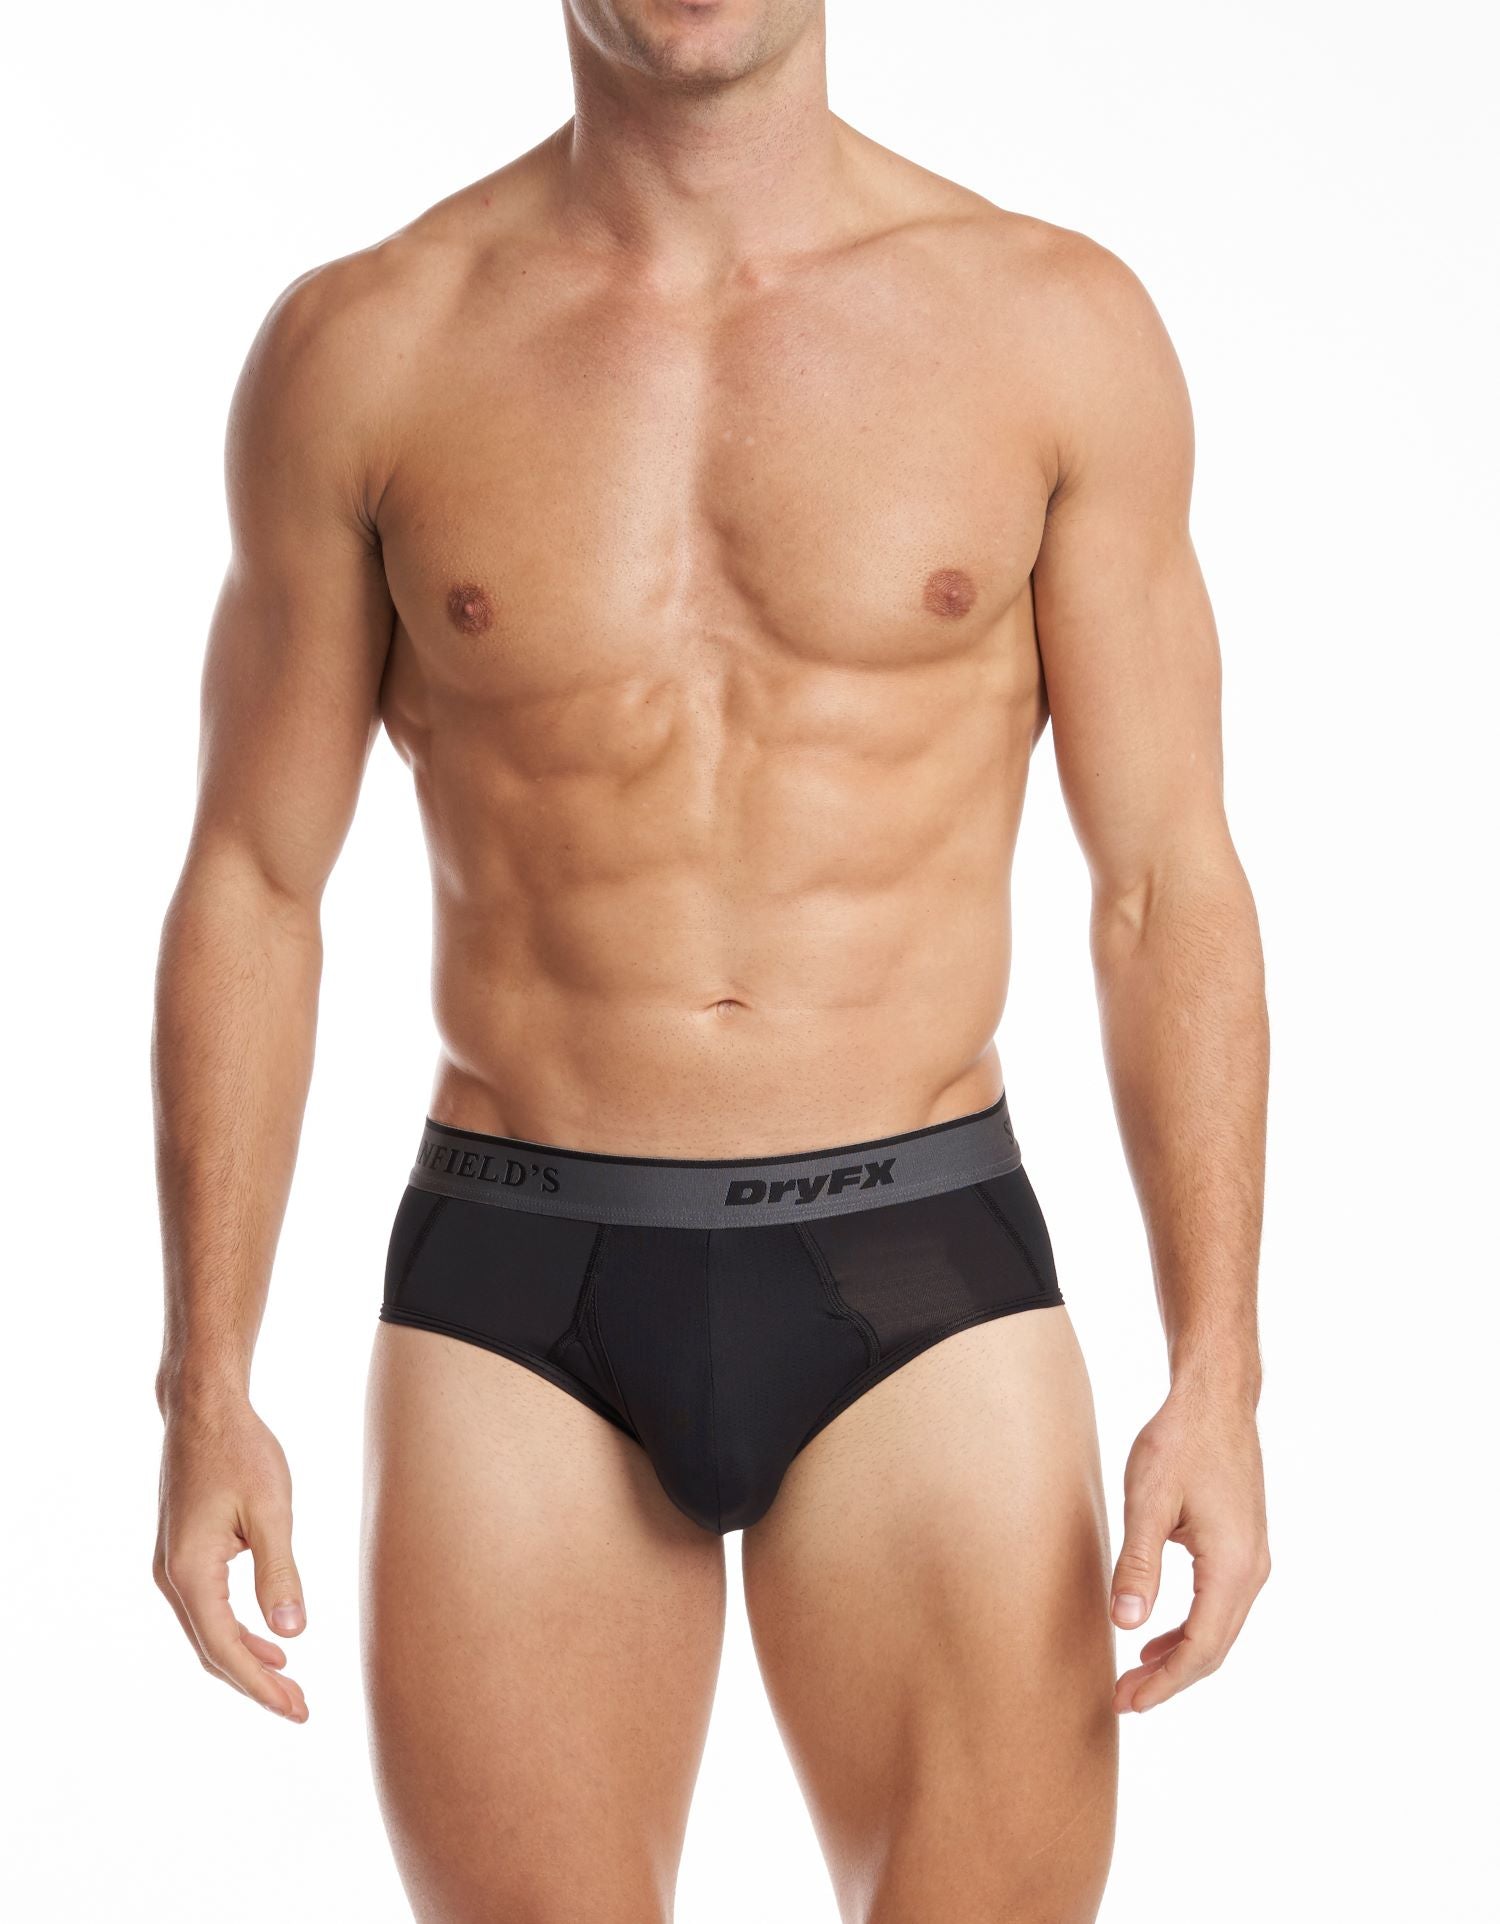 Men's Brief DryFX Collection (Cooling)